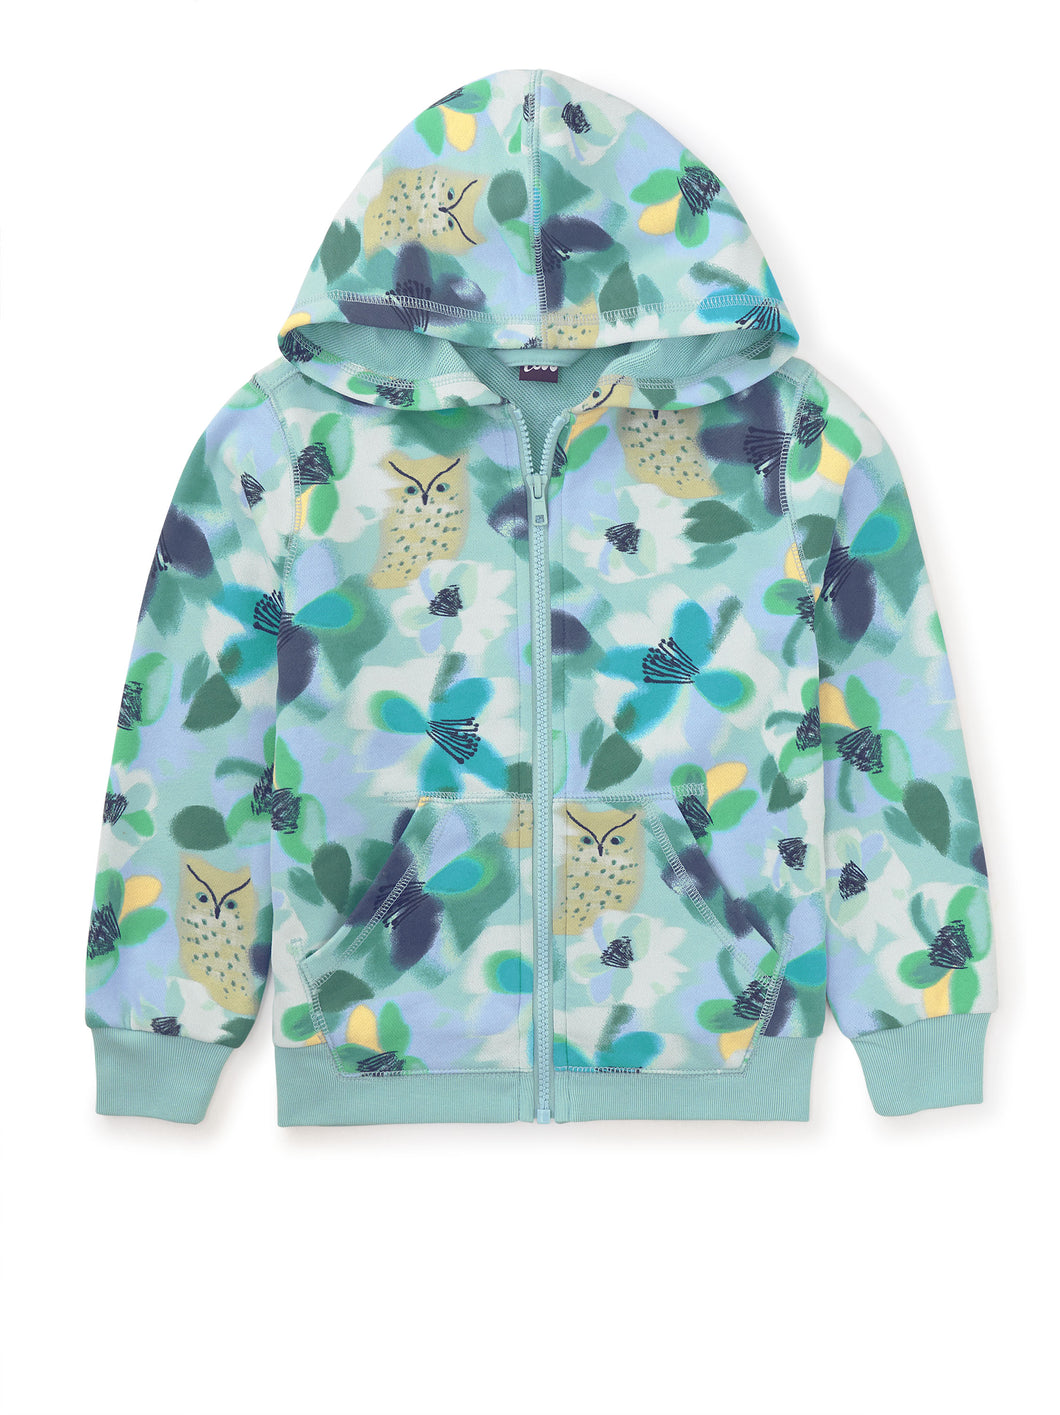 Tea Collection Good Sport Hoodie - Owl Impressions